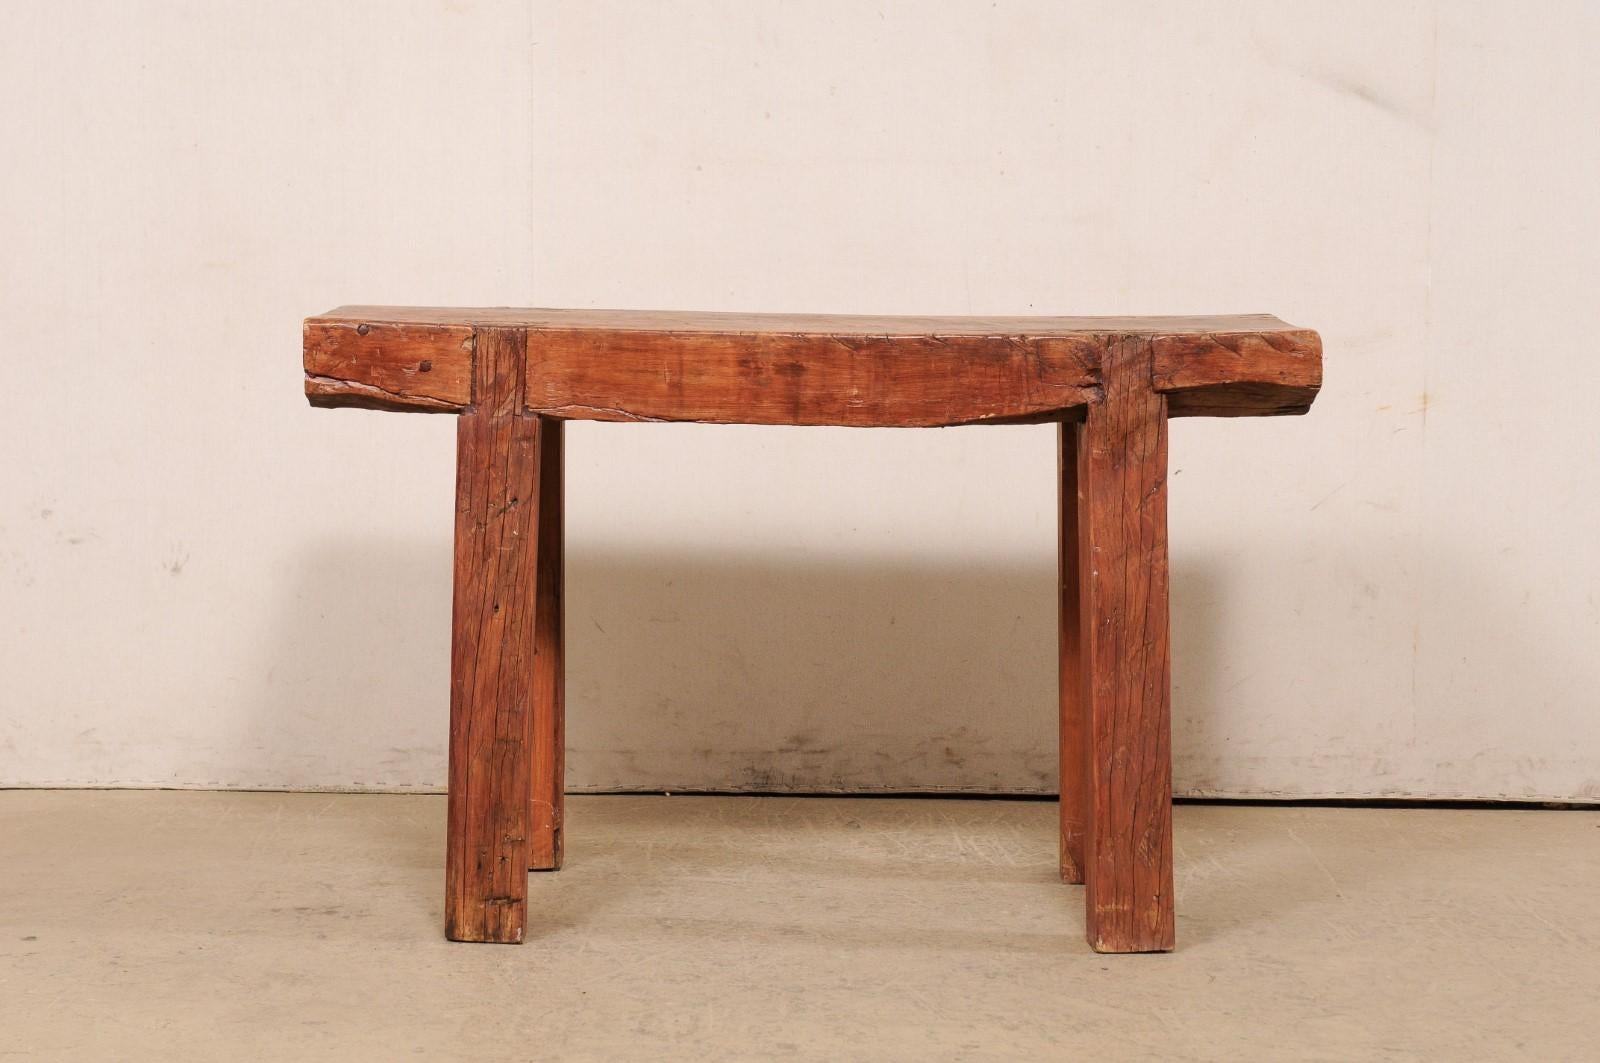 Beautifully Rustic Thick Chopping Block Top Table Would Be a Great Sink Base 1